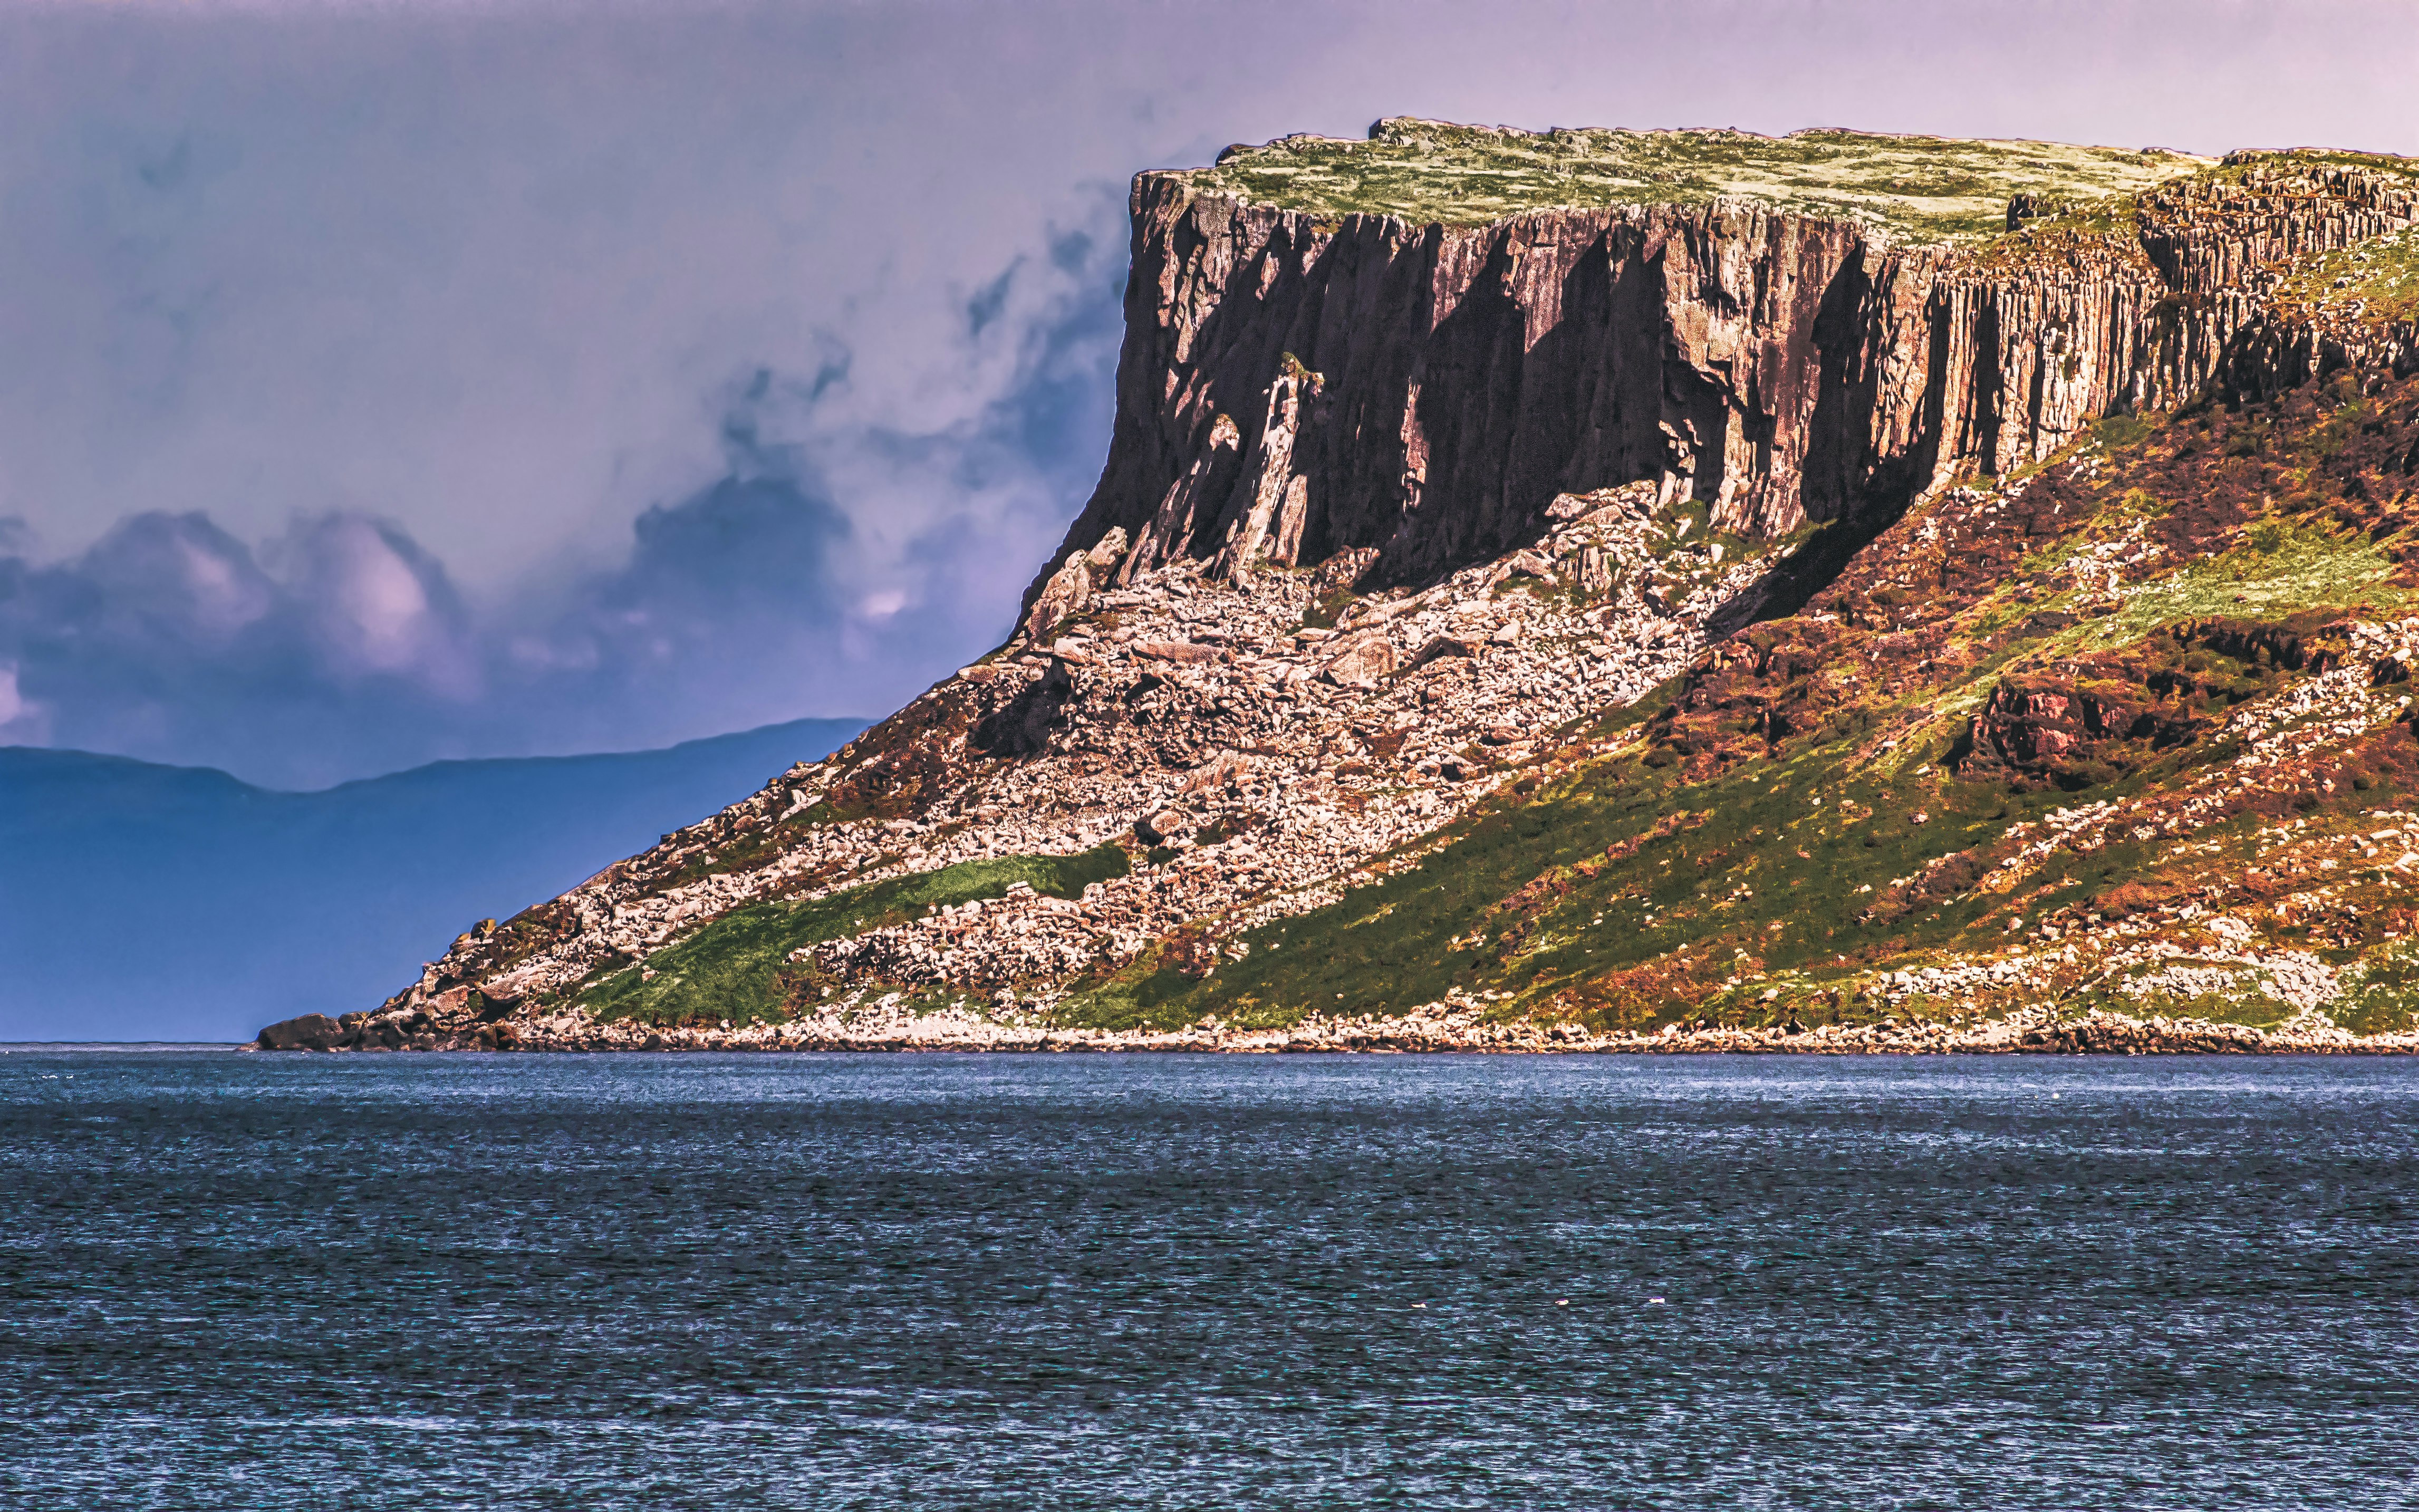 The mountain Fair Head's cliffs drop into the North Atlantic. The coast of Scotland is in the background. At this point, there is only 13 miles between Northern Ireland and Scotland (Aug, 2019).